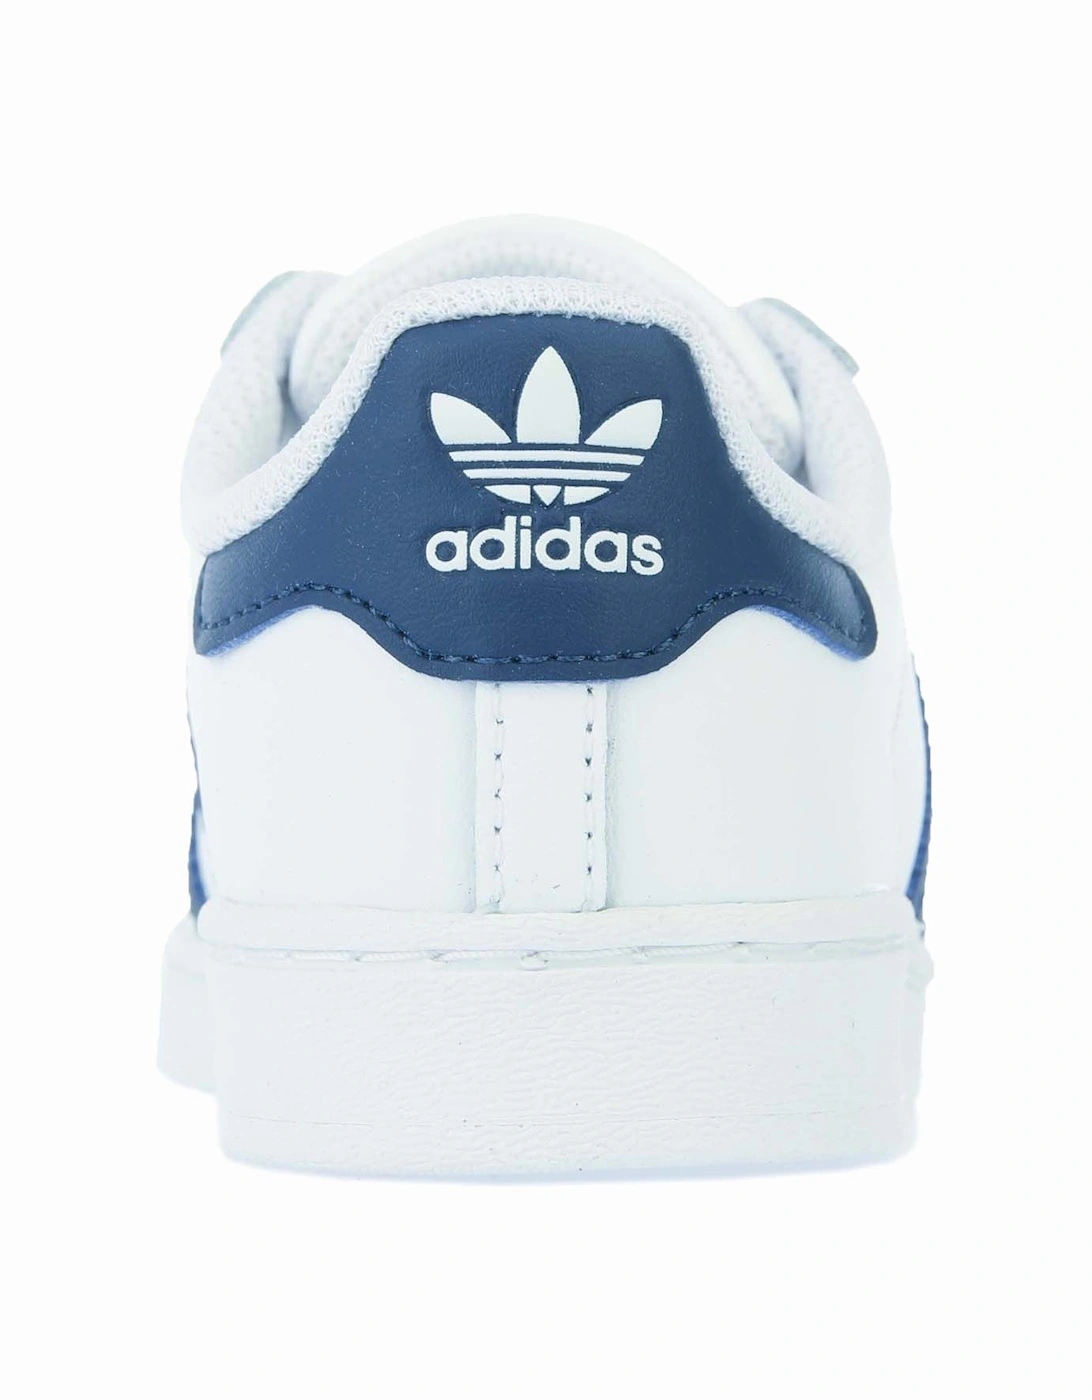 Infant Superstar Trainers